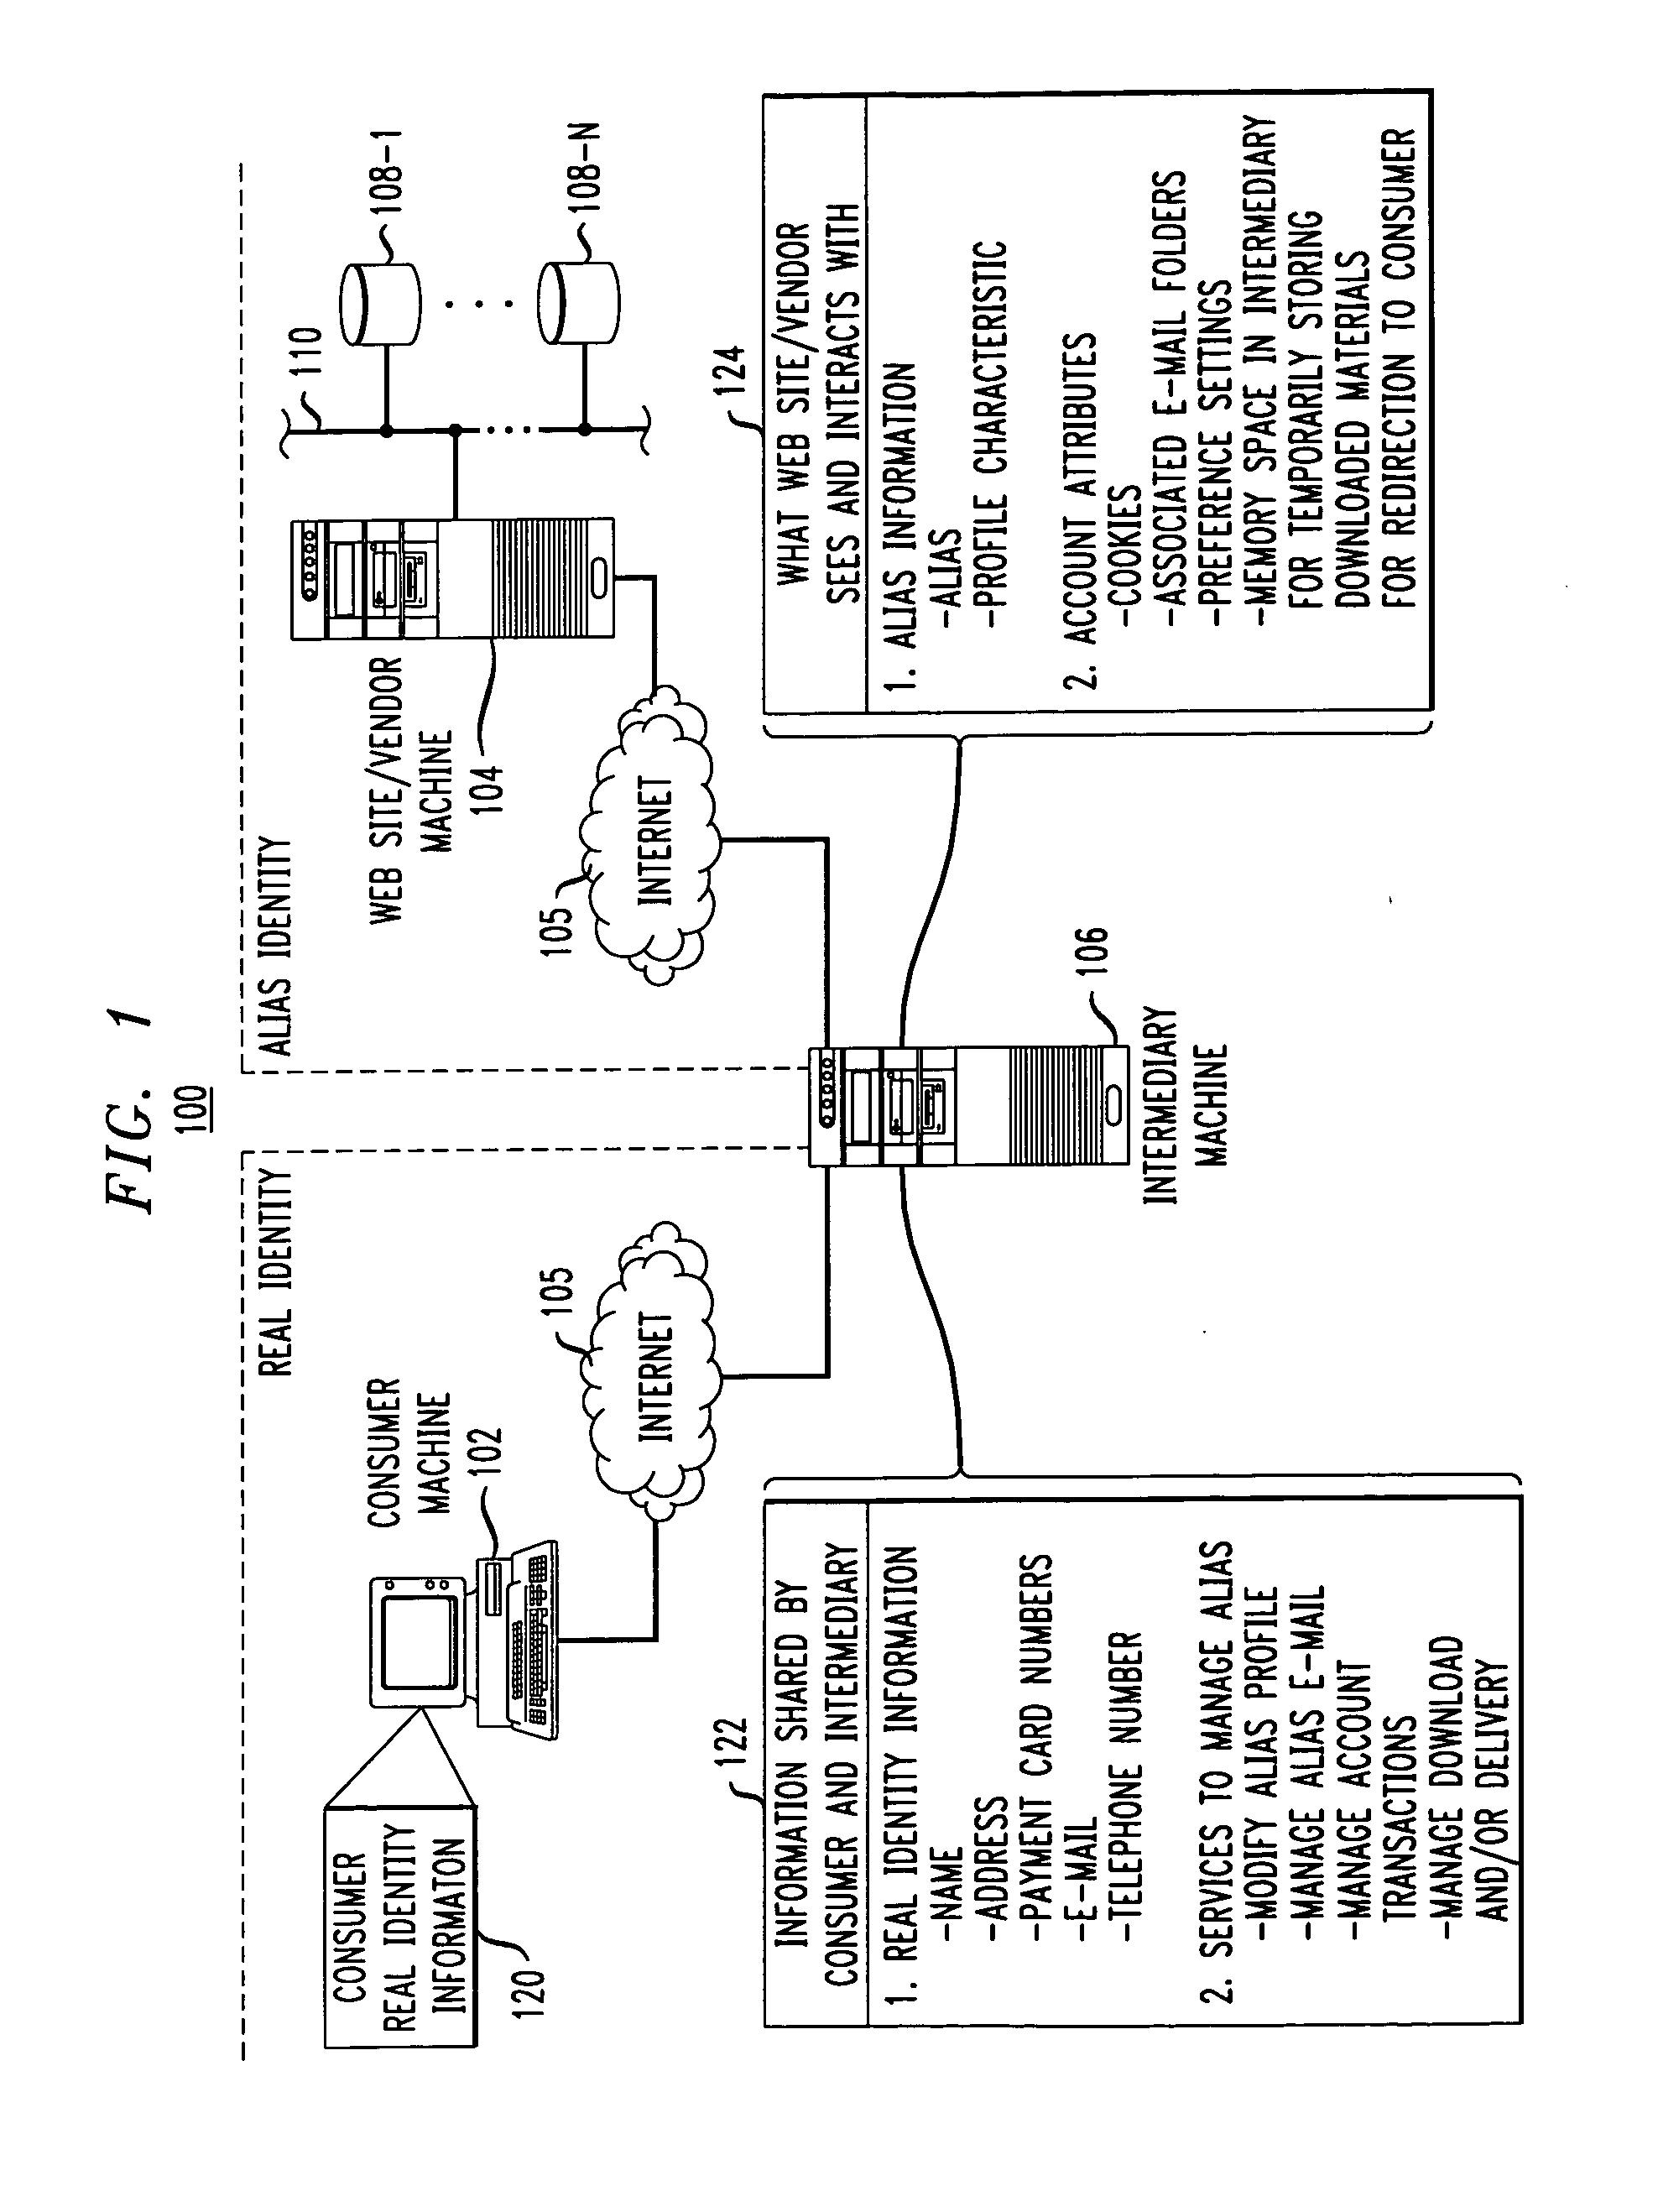 Methods and apparatus for providing user anonymity in online transactions